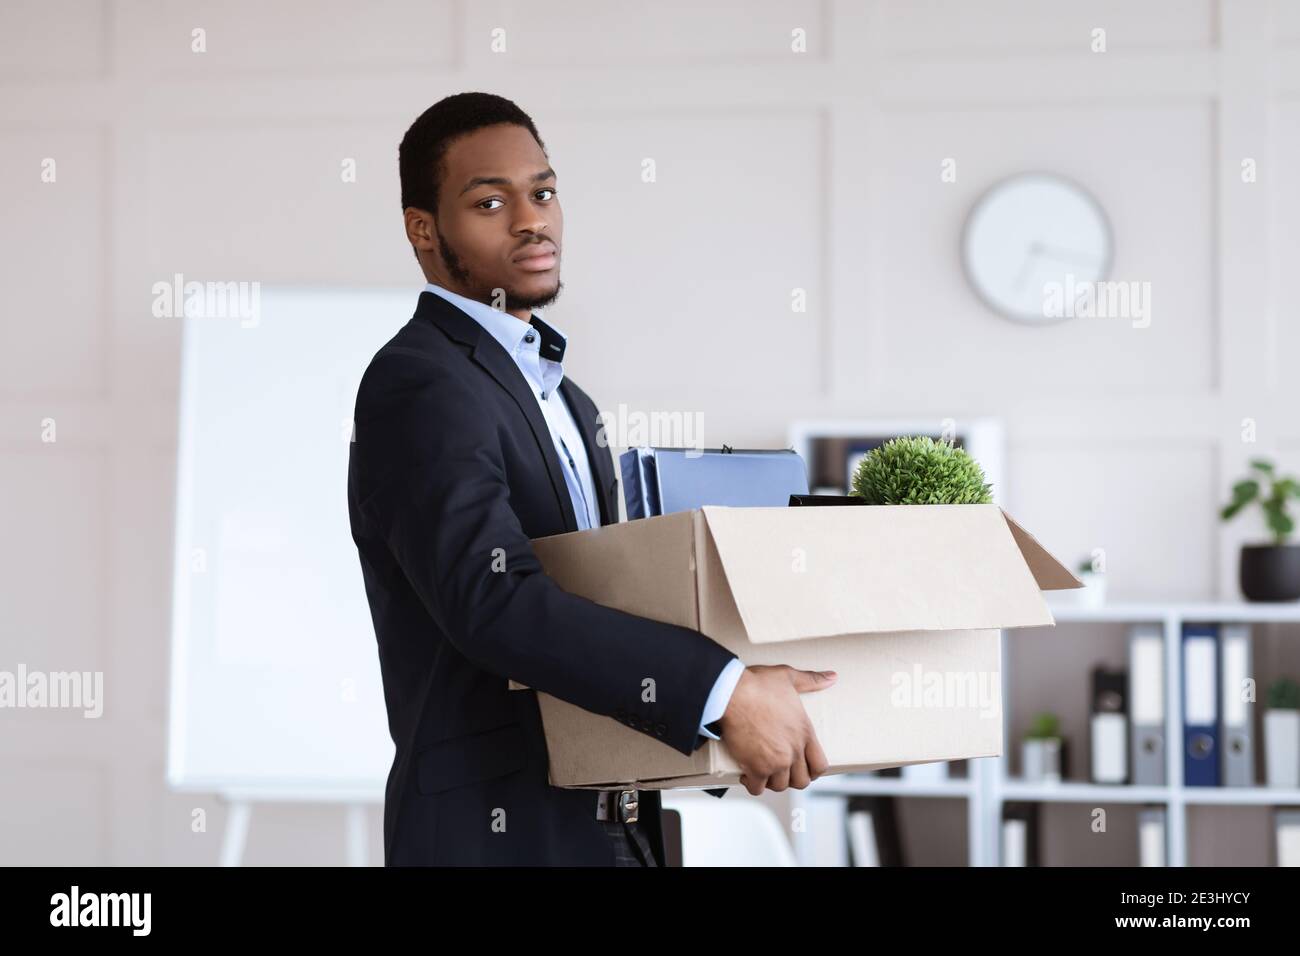 Young black man got fired, holding box with his belongings Stock Photo